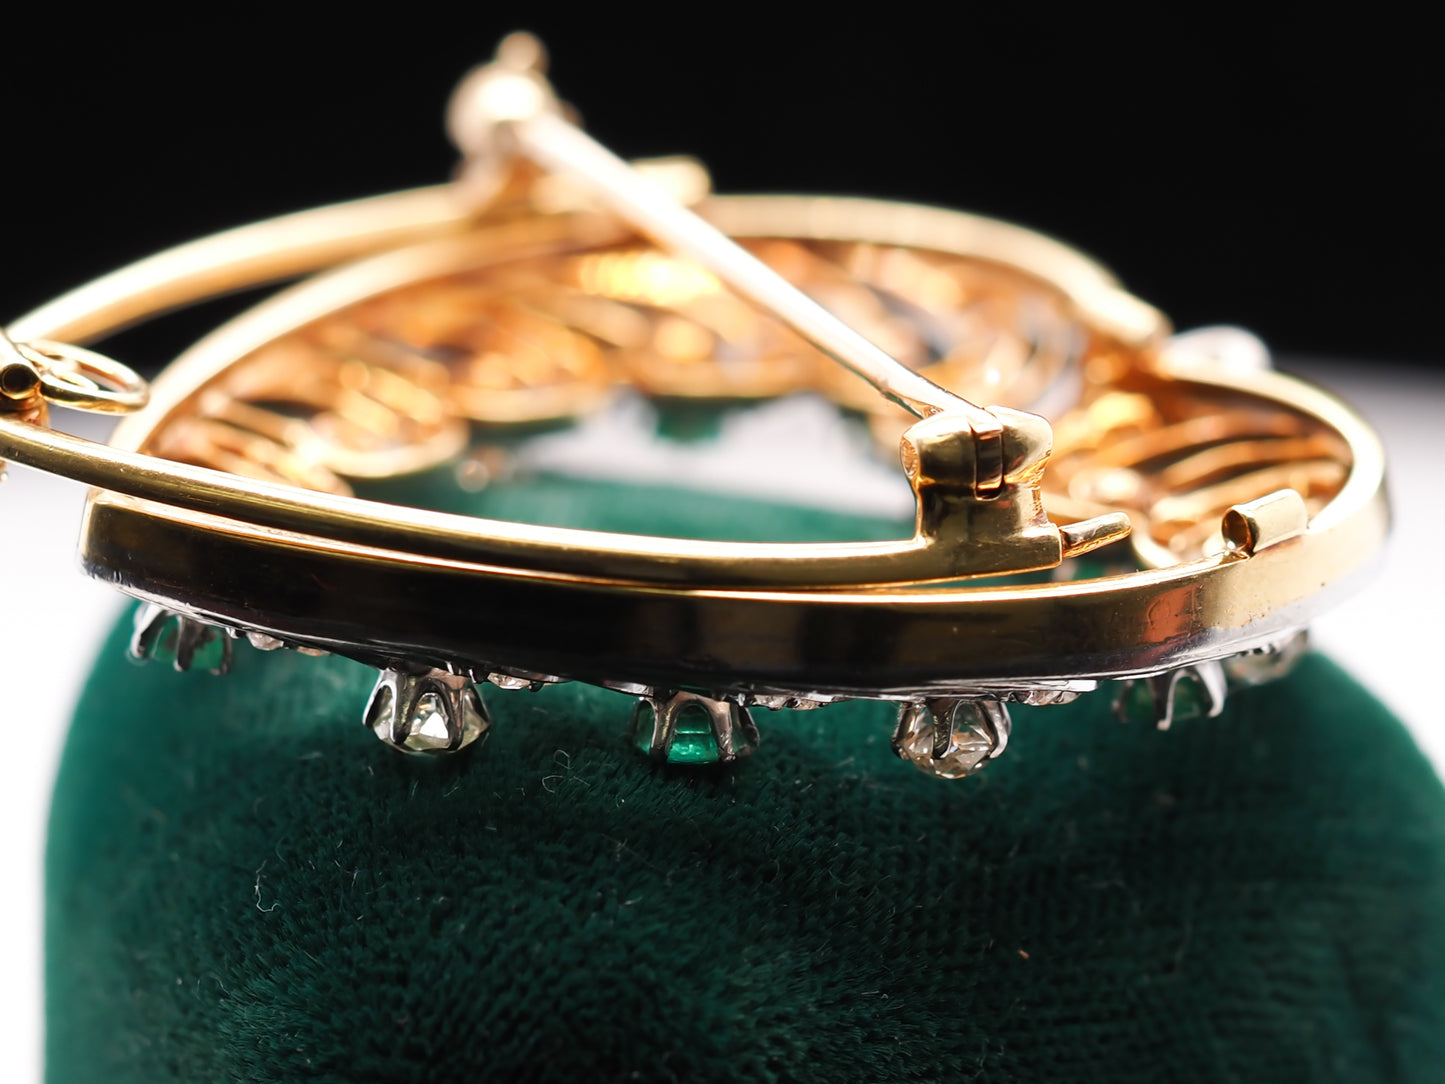 18K Gold and Platinum Top Edwardian Emerald and Old Mine Cut Diamond Pendant with Brooch Attachment